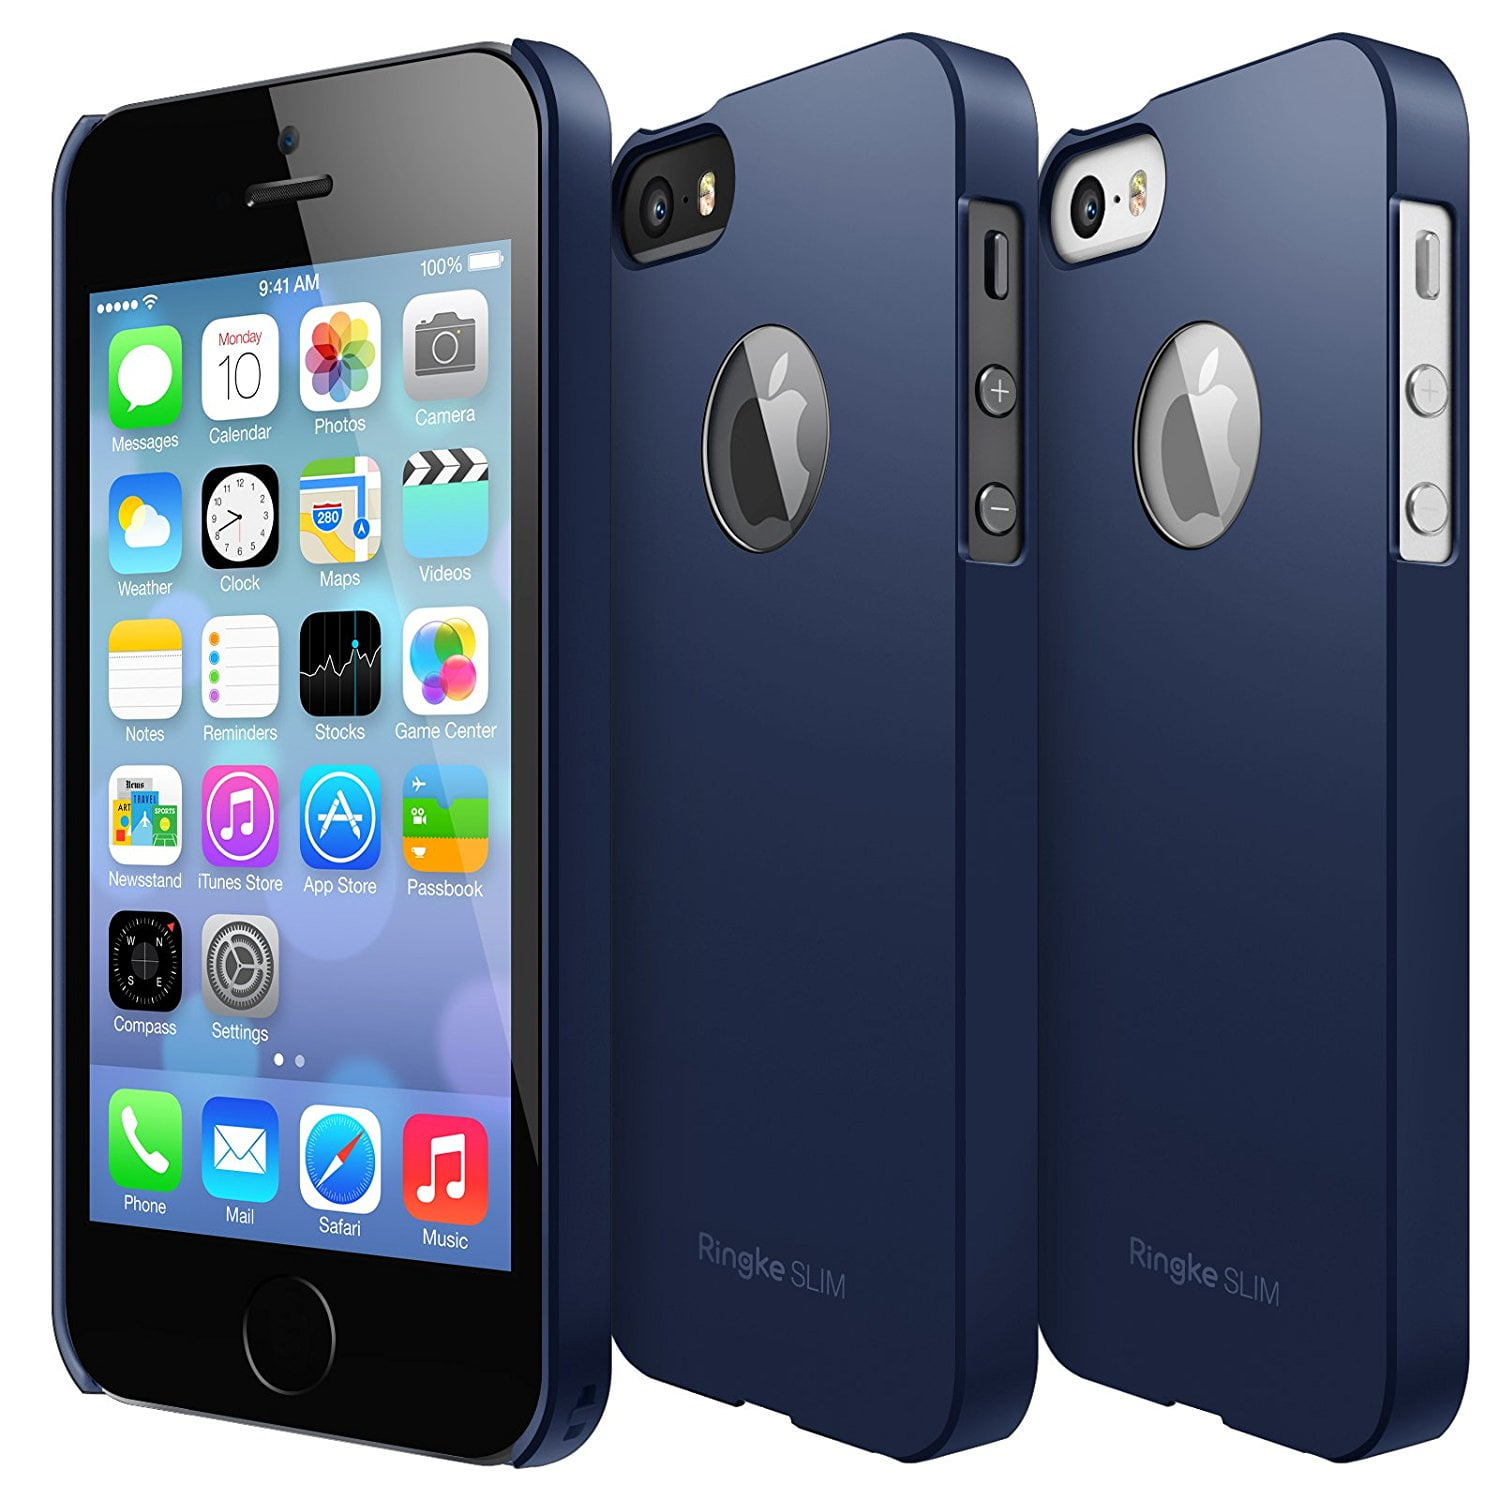 Ringke Slim Case Compatible with iPhone 5s, Lightweight Thin Soft Premium Coating Hard PC Cover LF Mint Walmart.com